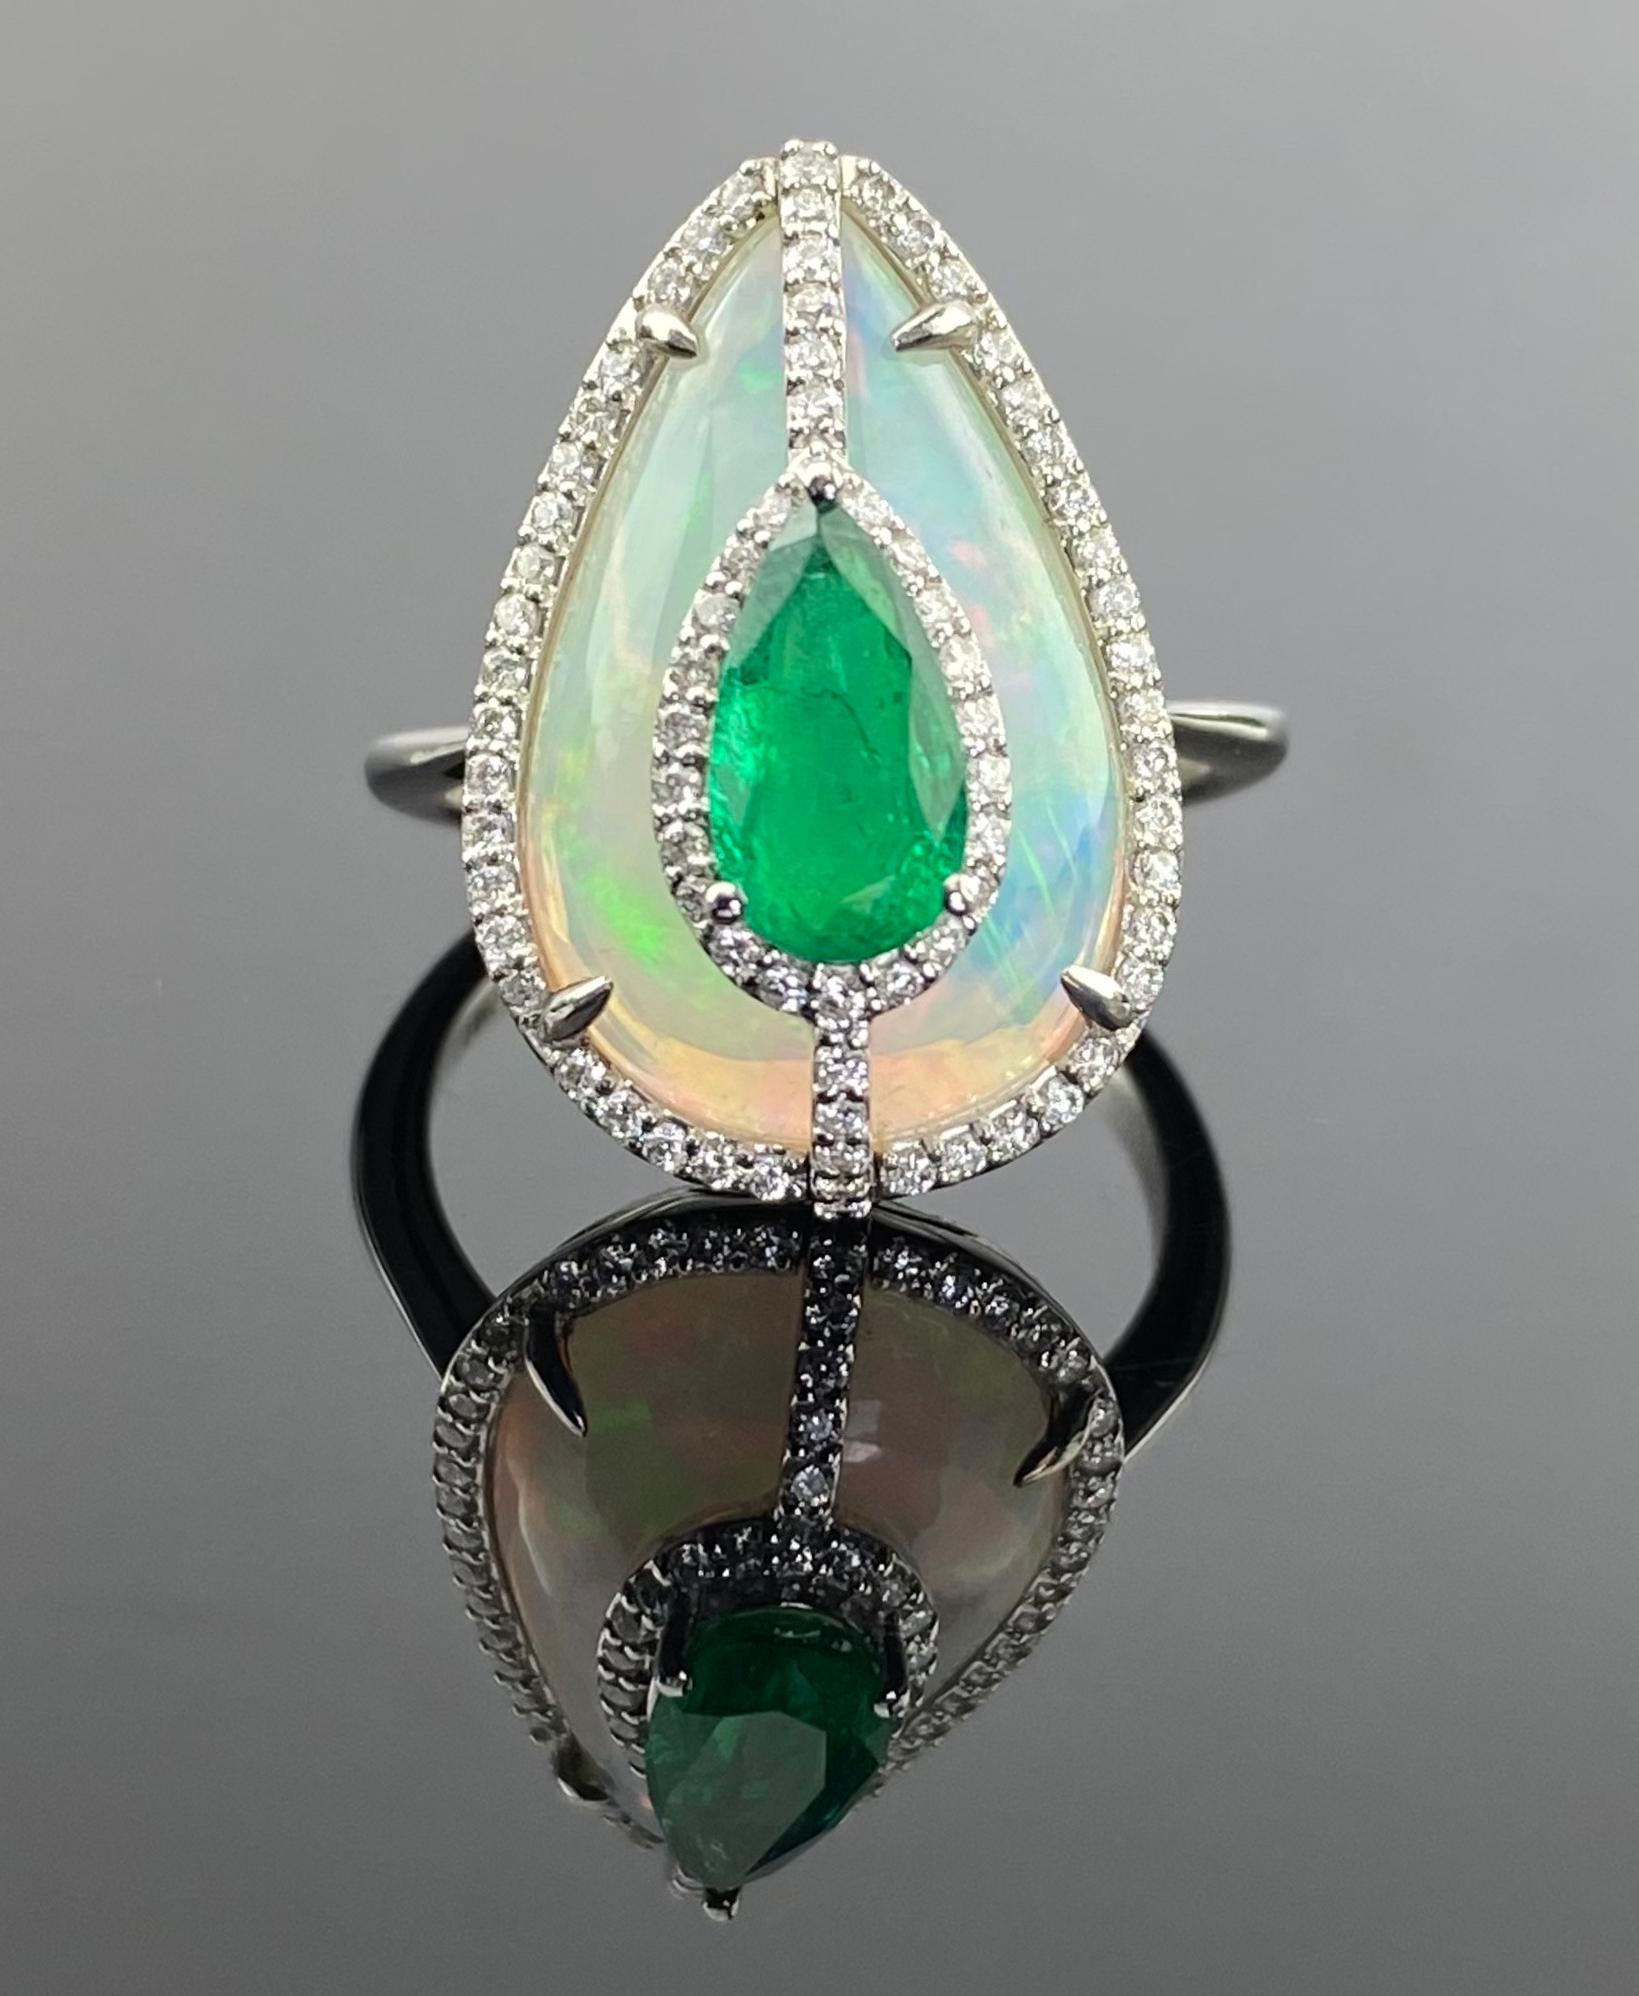 This exquisite pear-shaped ring is a stunning masterpiece that combines the brilliance of diamonds, the lush green allure of emeralds, and the captivating play of colors from opals. Currently sized at US 7, can be resized. We provide free shipping